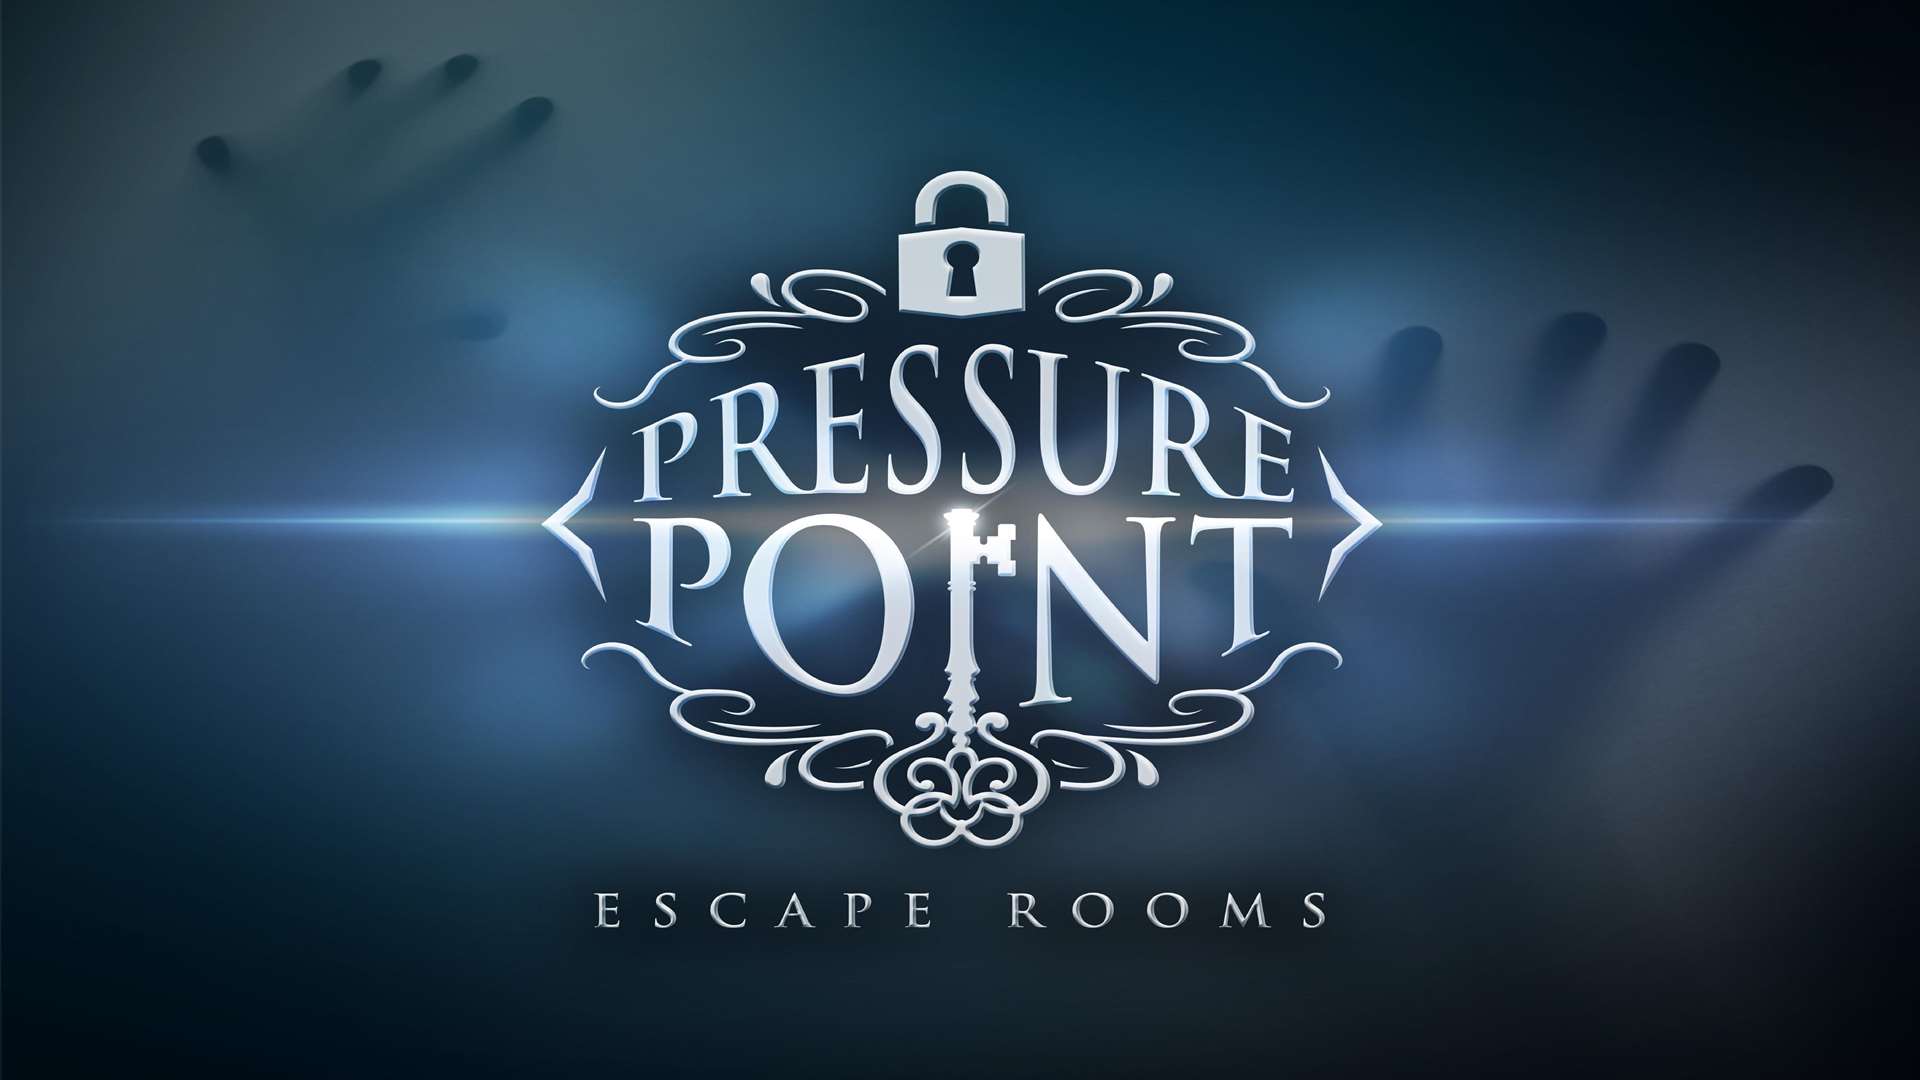 Pressure Point Escape Rooms will be opening in Ashford